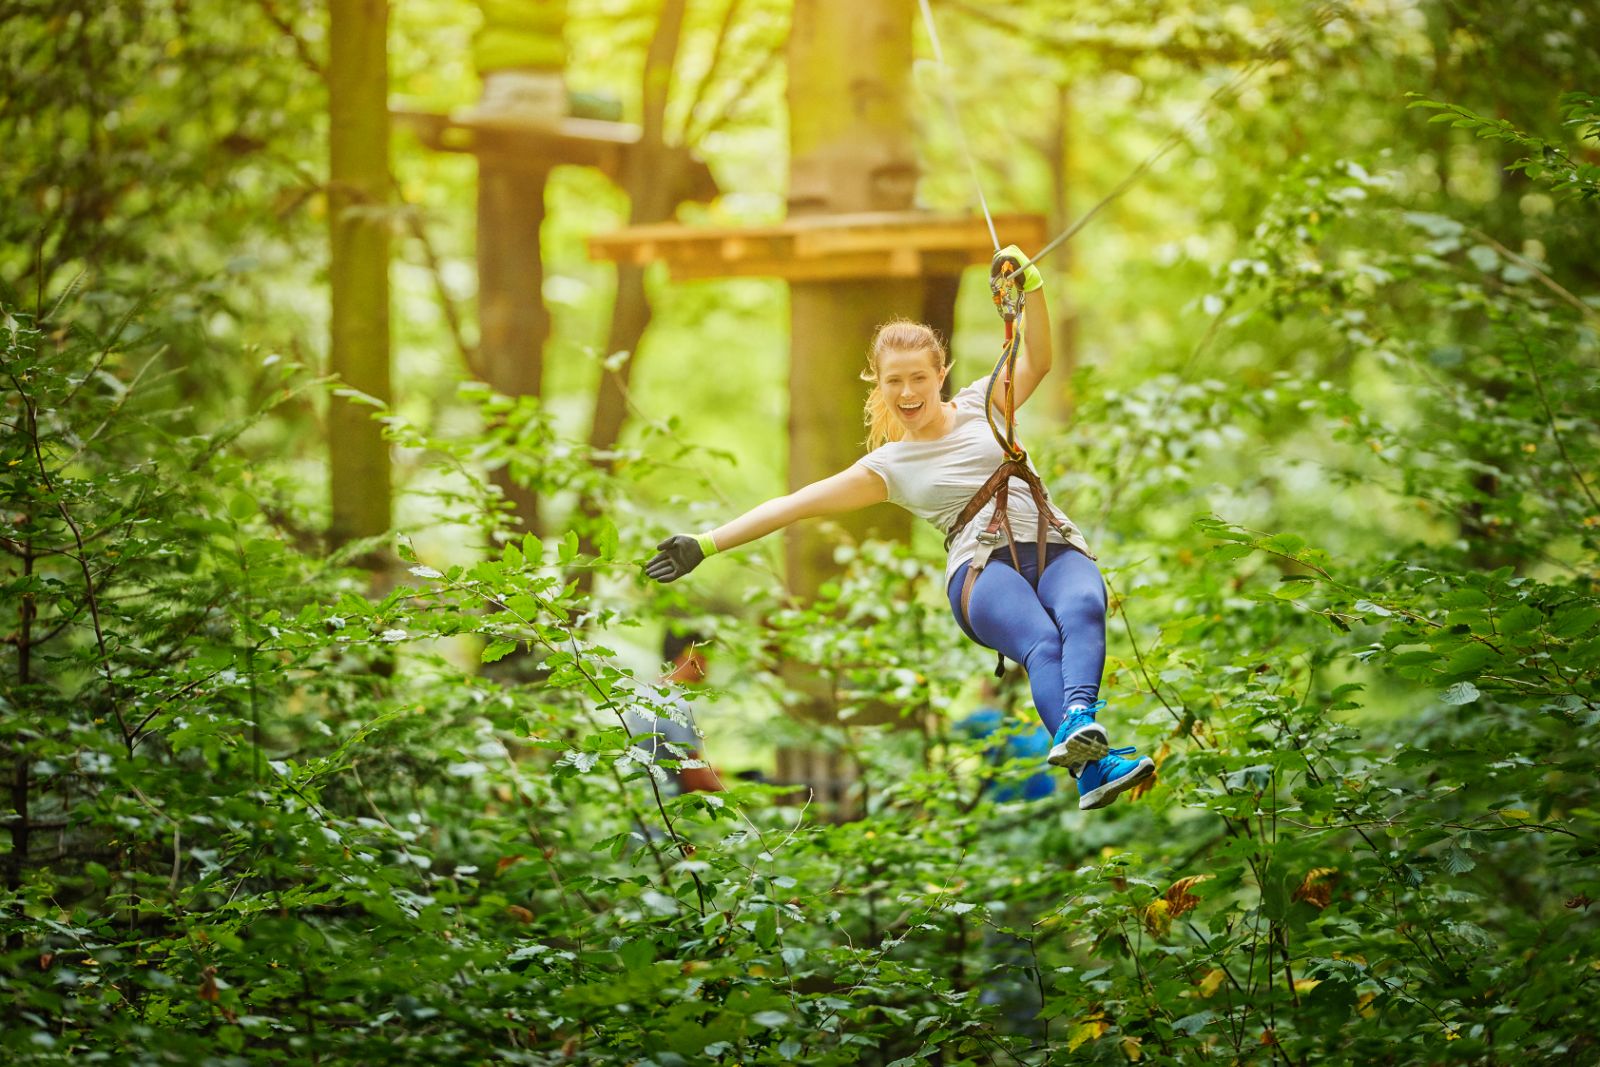 A lady canopy zip lining through a forest